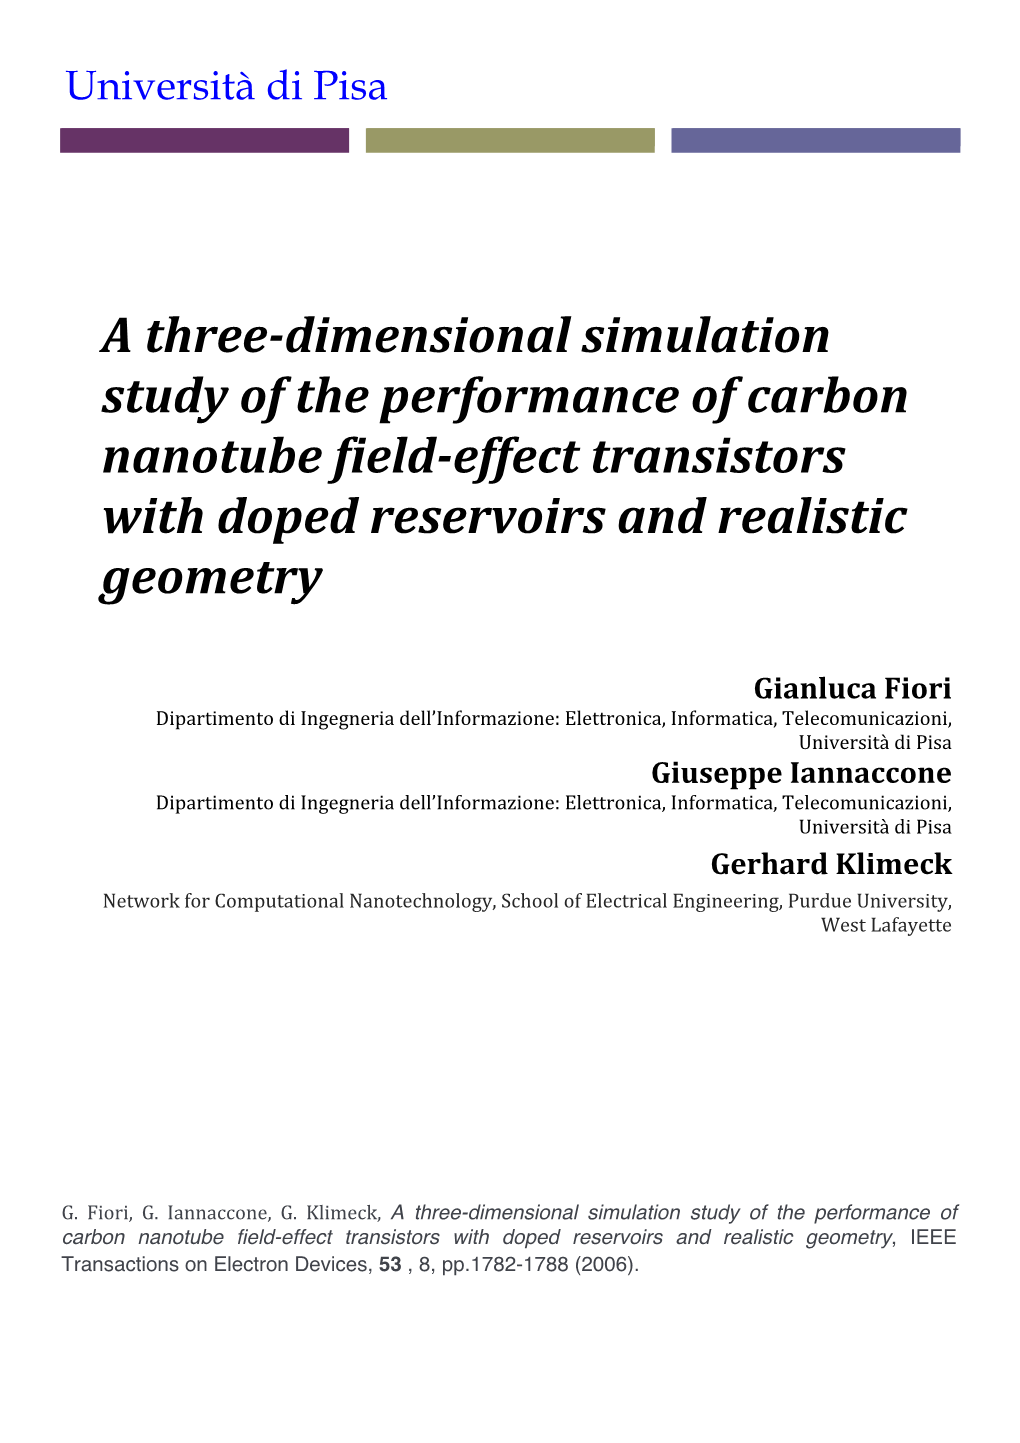 A Three-Dimensional Simulation Study of the Performance of Carbon